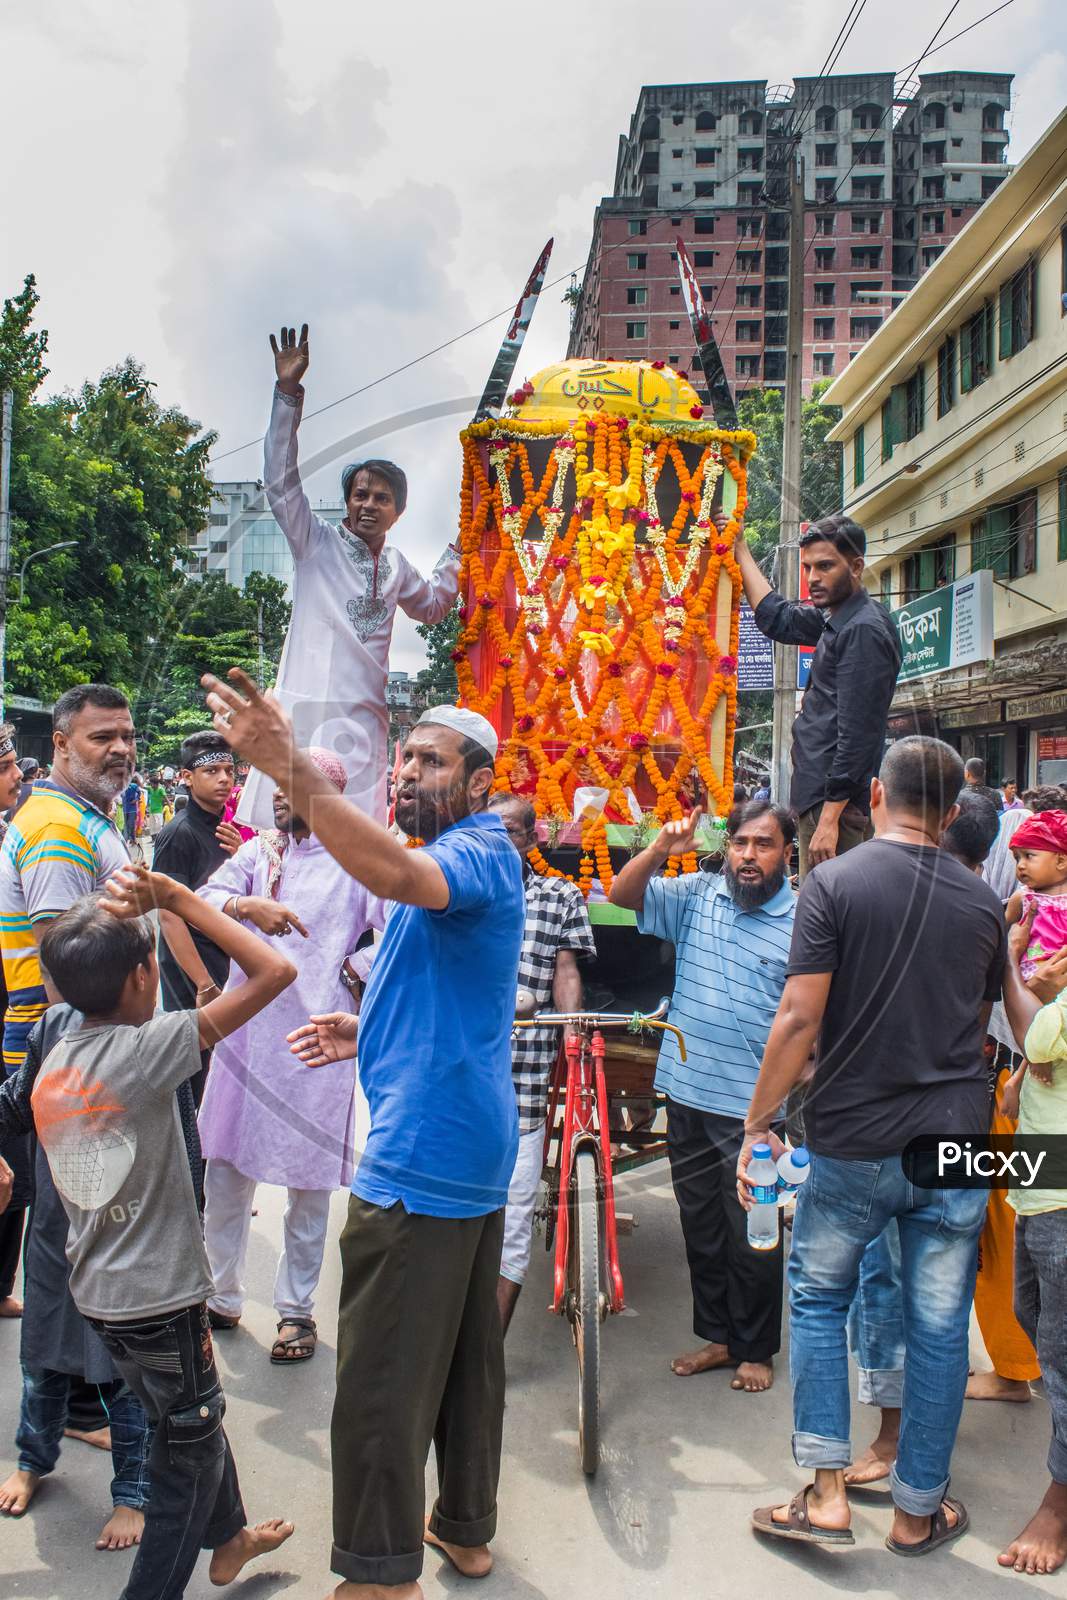 Yearly Calm Procession Of Shia Muslims. Every Year They Celebrate This Calm Procession Against Bad Humans. On This Day They Also Pray For World Peace. I Captured This Image On September-10-2019, From Dhaka, Bangladesh.